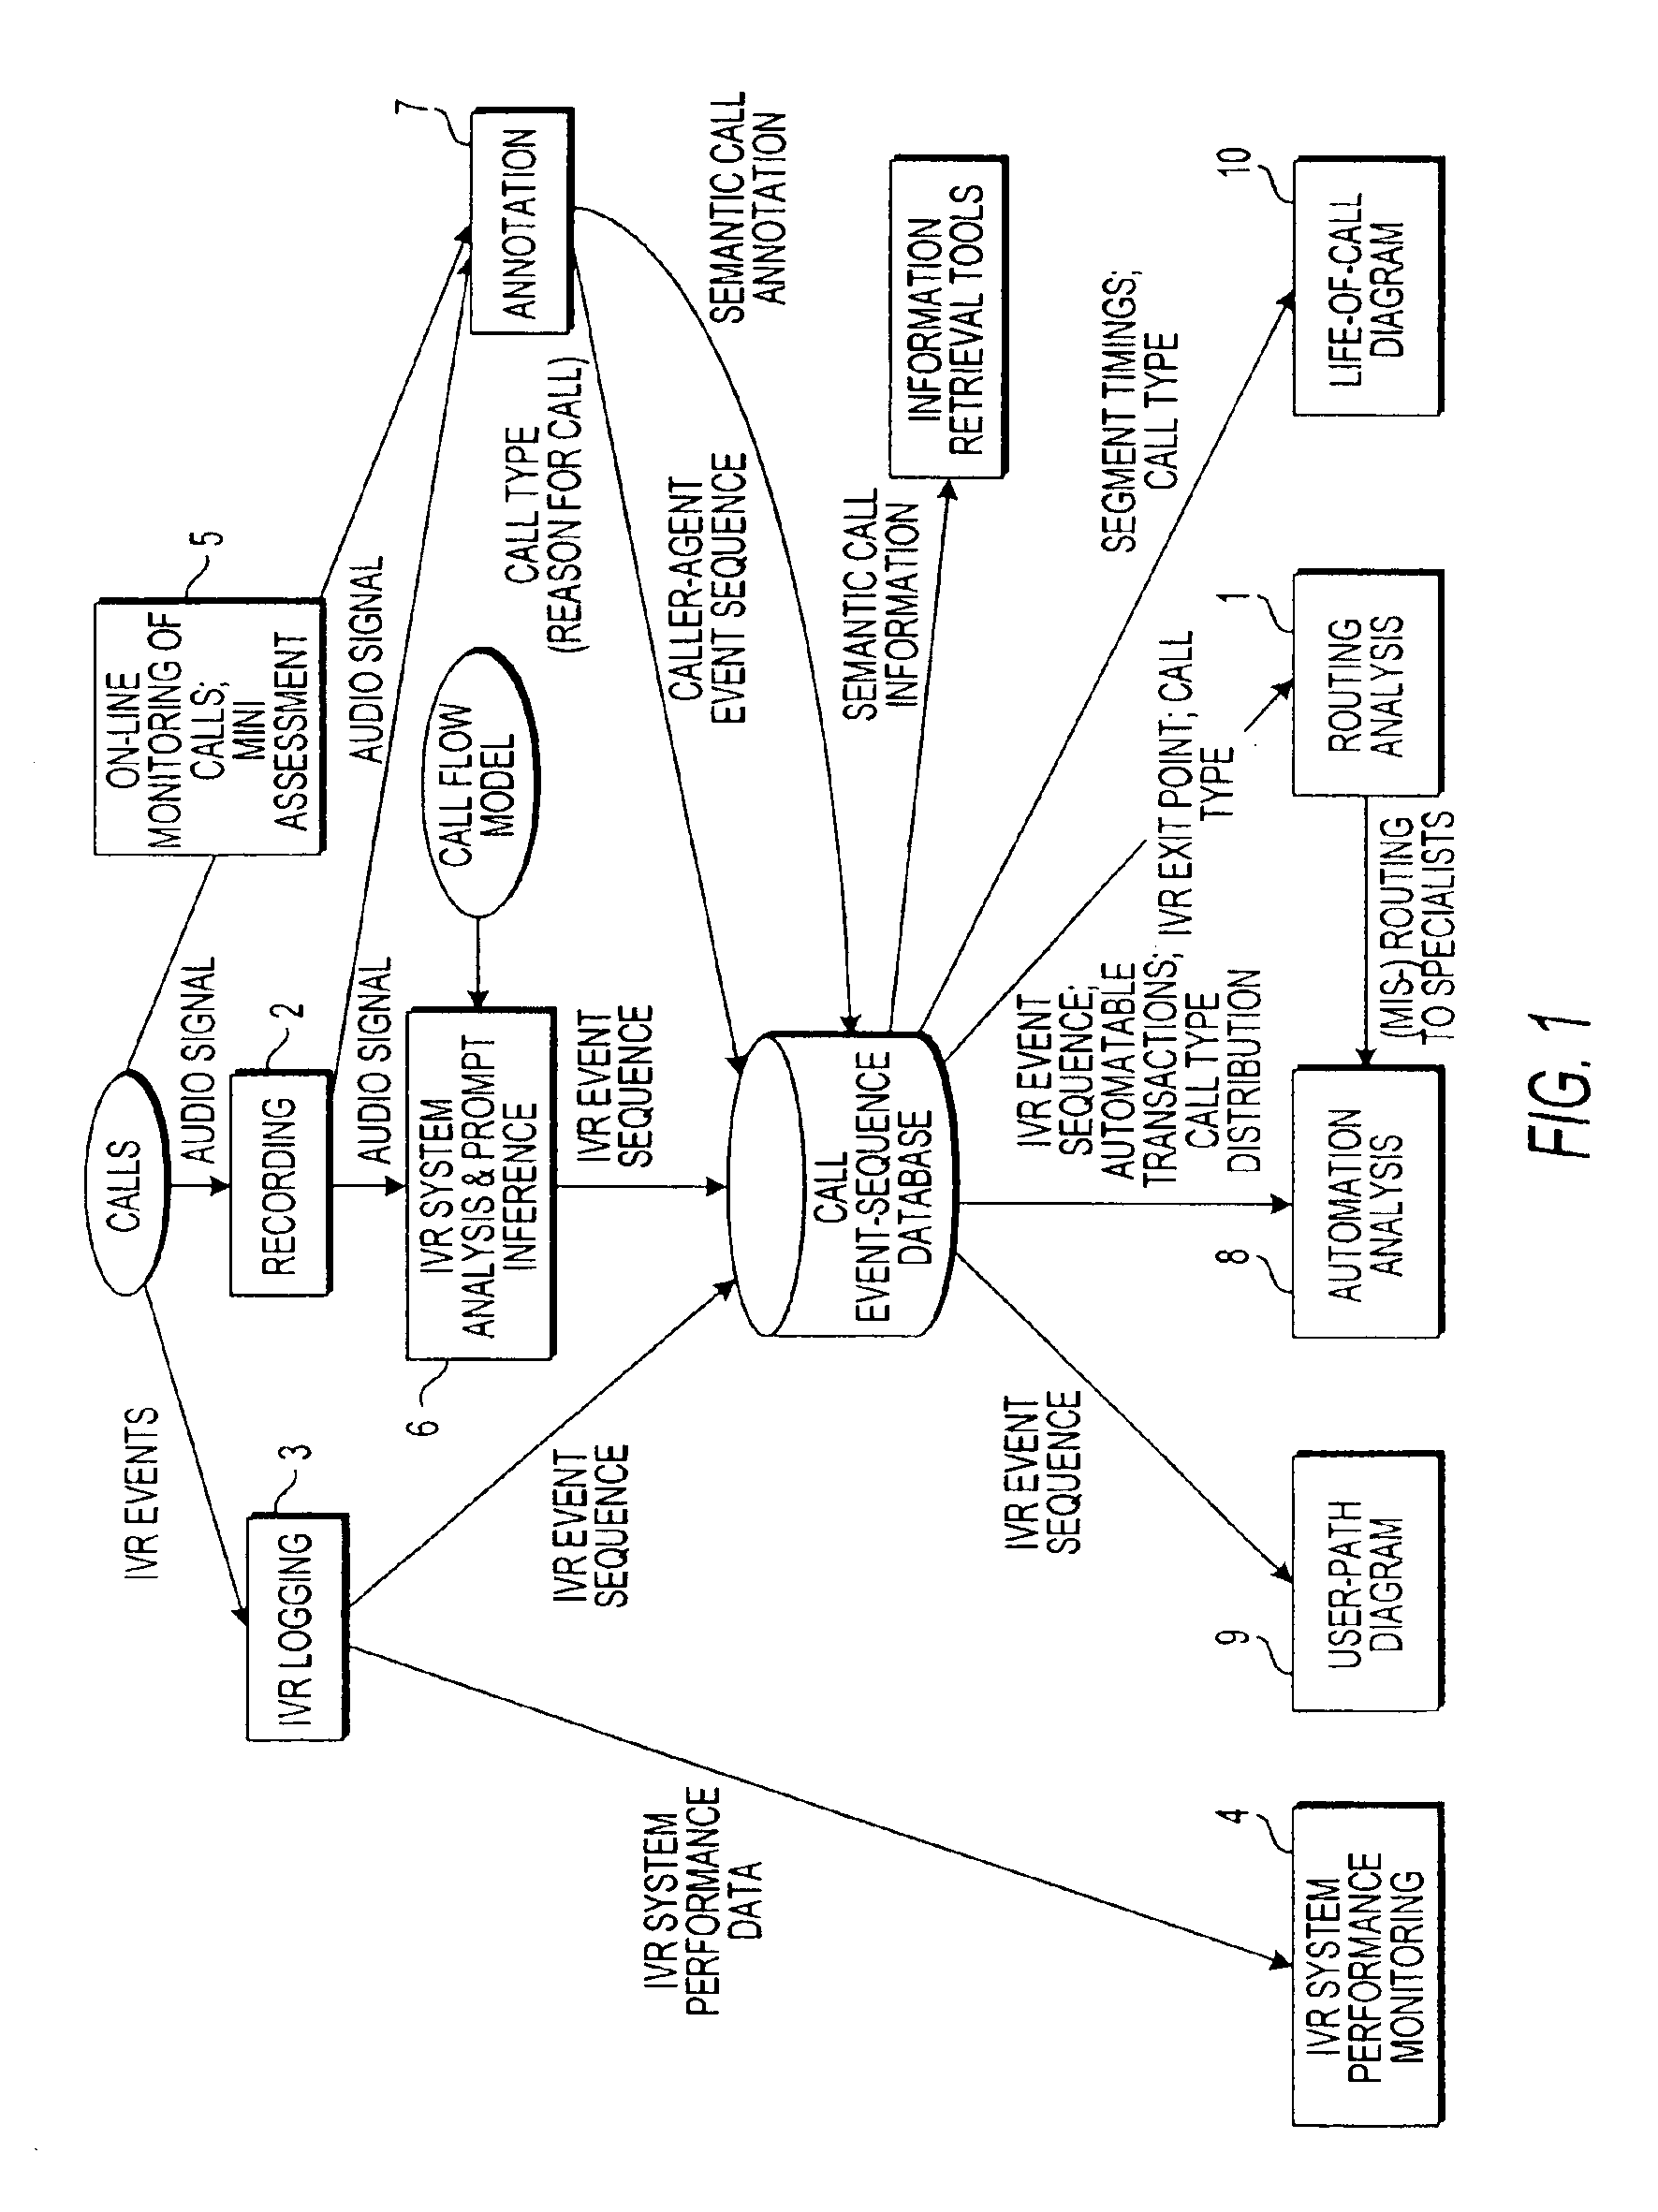 System and method for assessing a call center